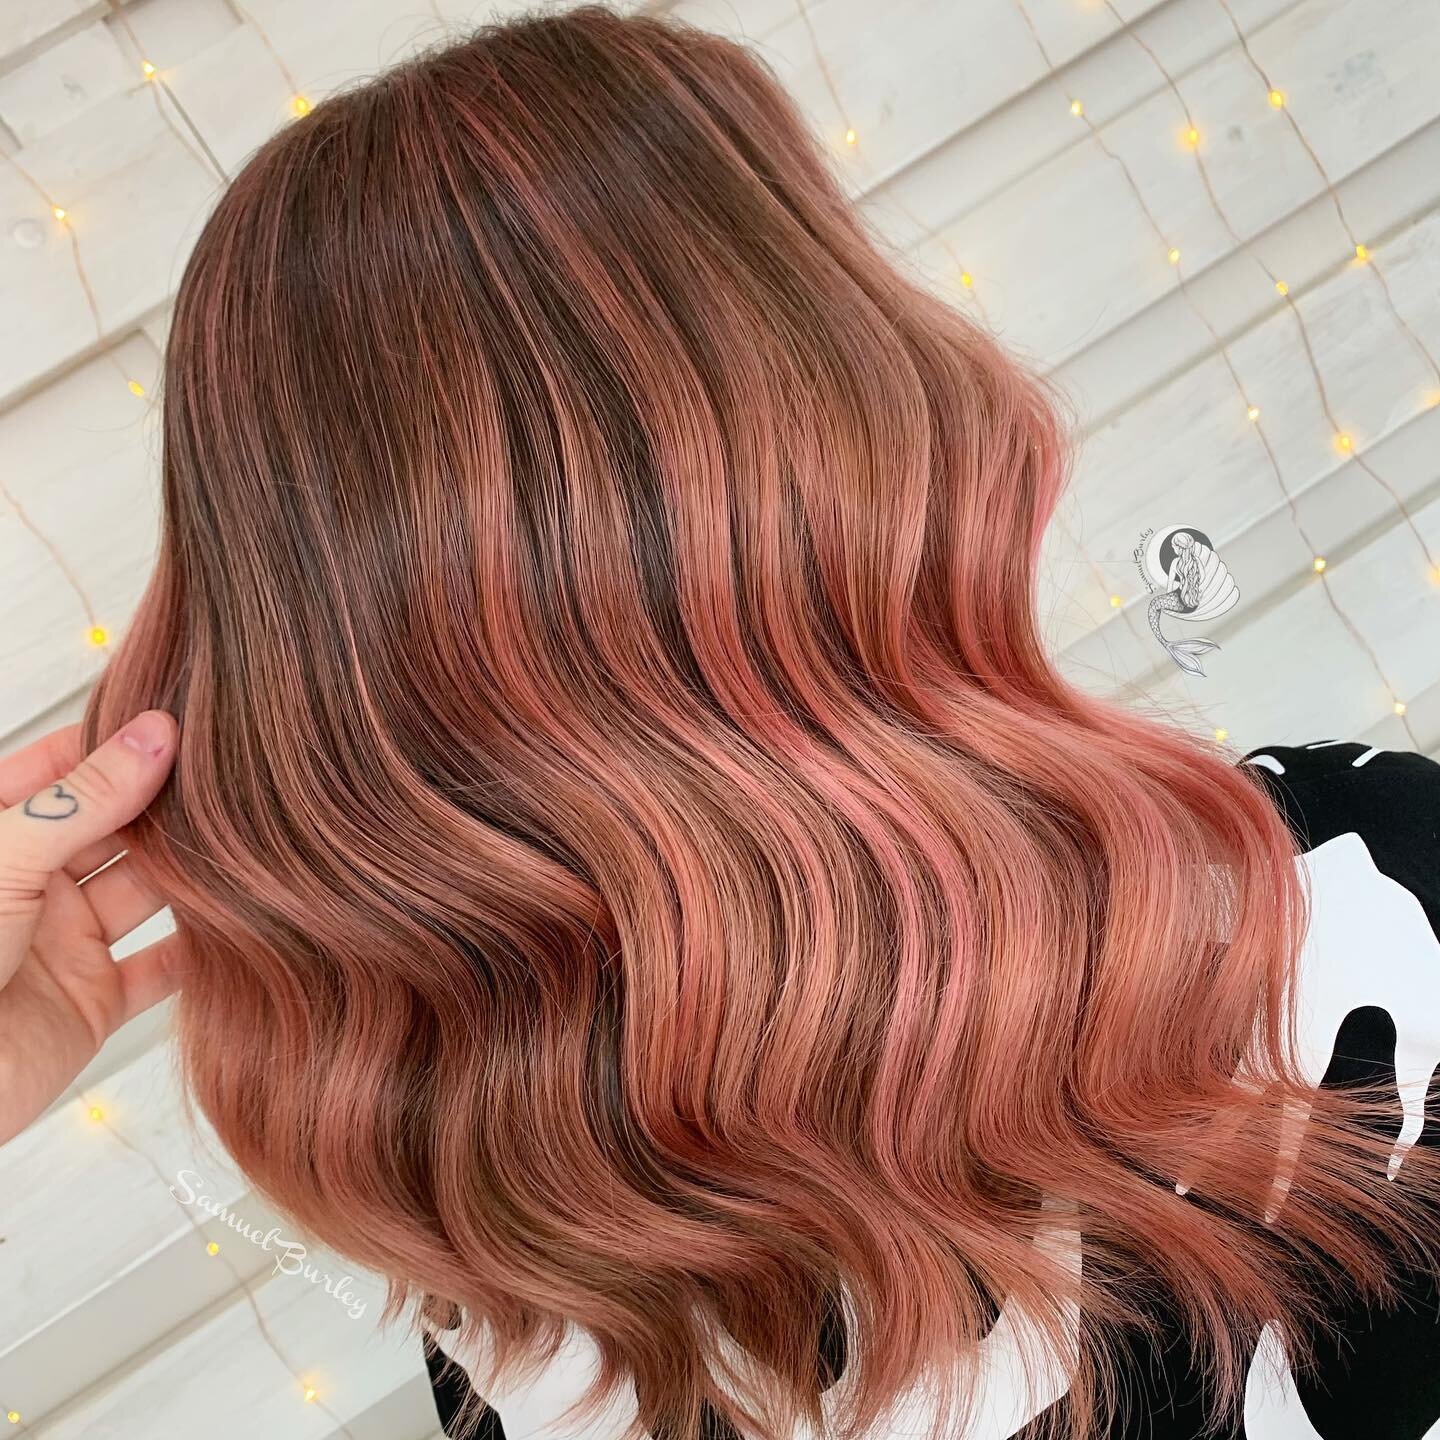 Balayage, but make it blush 🐙 I am living for this colour ✨
A combination of air touch balayage and teased highlights to create bold and melty ribbons.
Olaplex was used in every step of the process from lightening &amp; glossing to blow drying and s